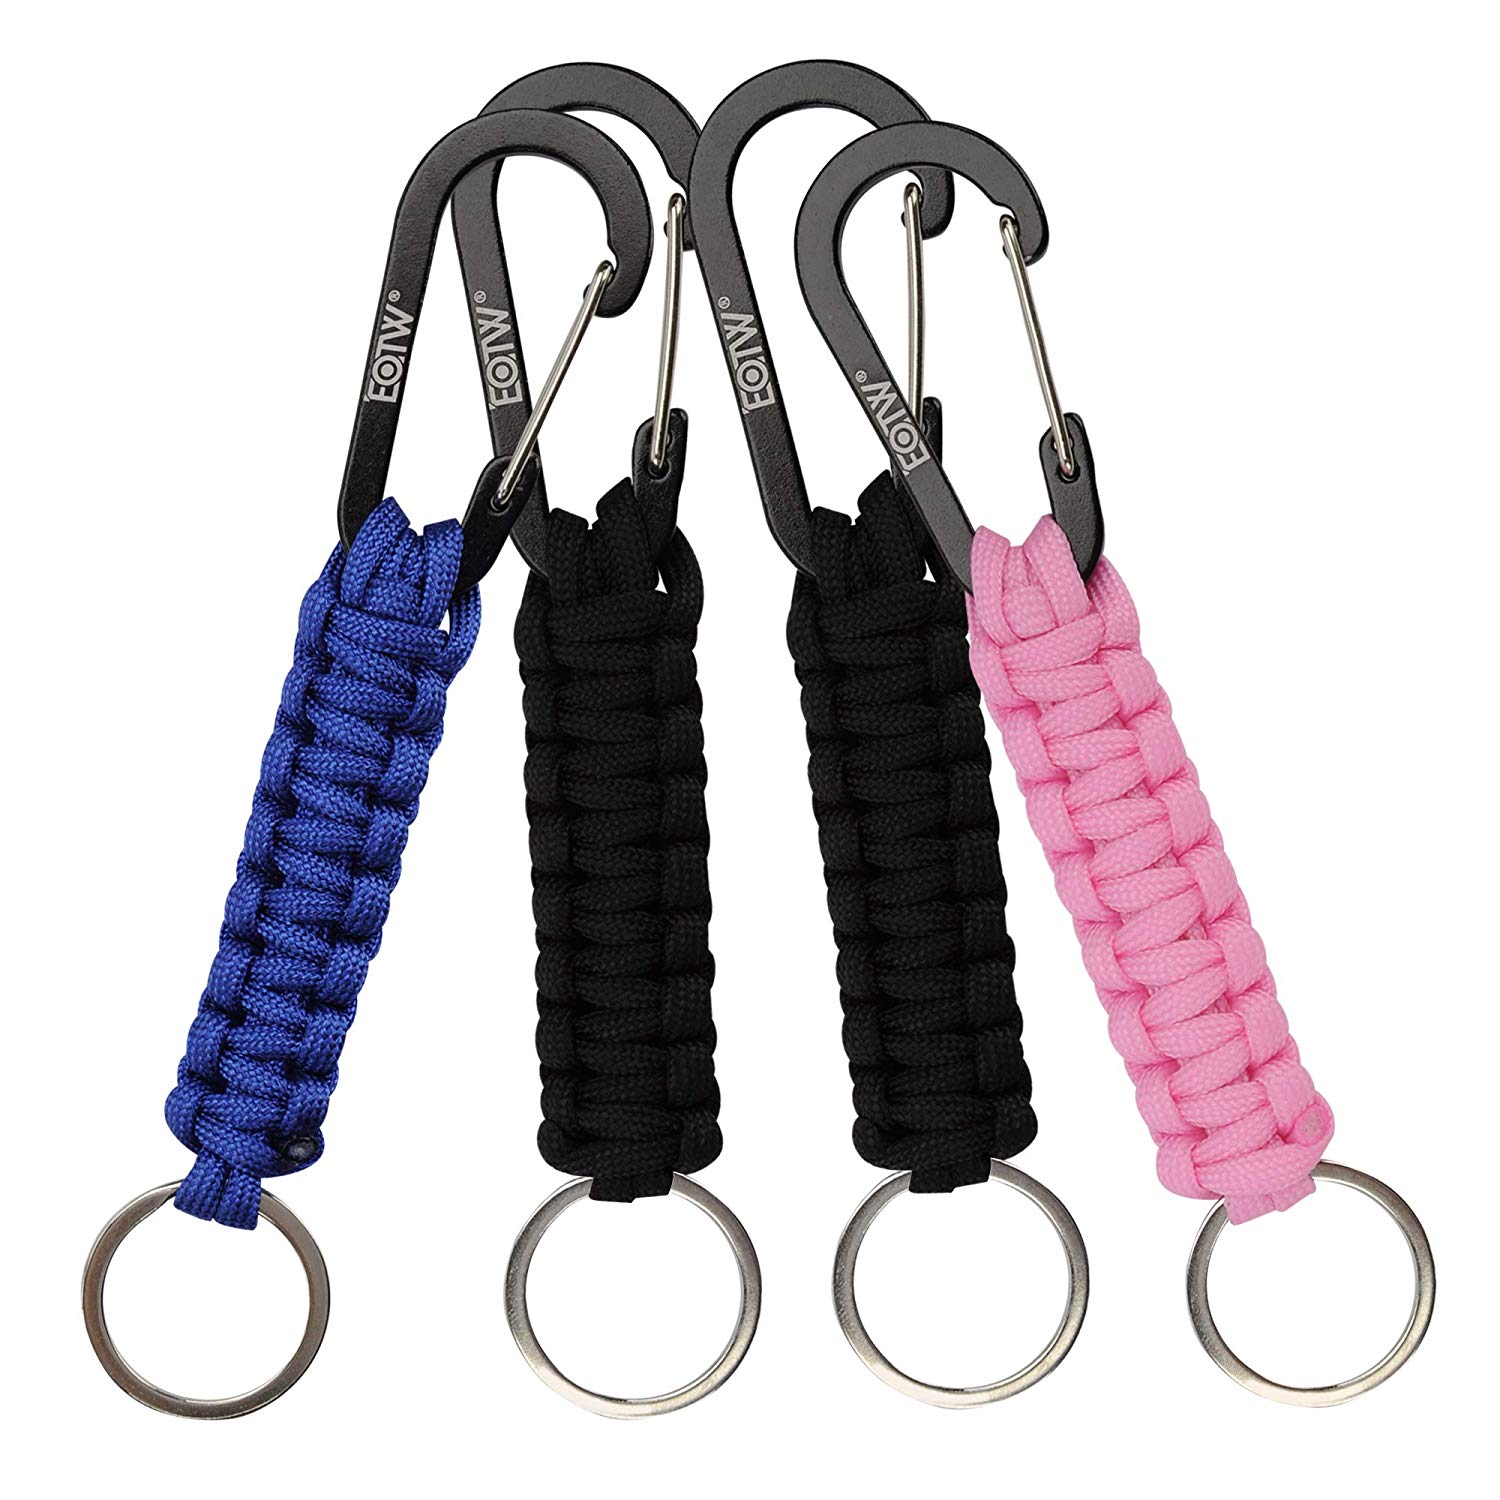 EOTW Paracord Keychain with Carabiner Military Braided Lanyard Utility Survival Lanyard King Ring Hook for Keys Knife Flashlight for Outdoor Camping Hiking Backpack 4Pack